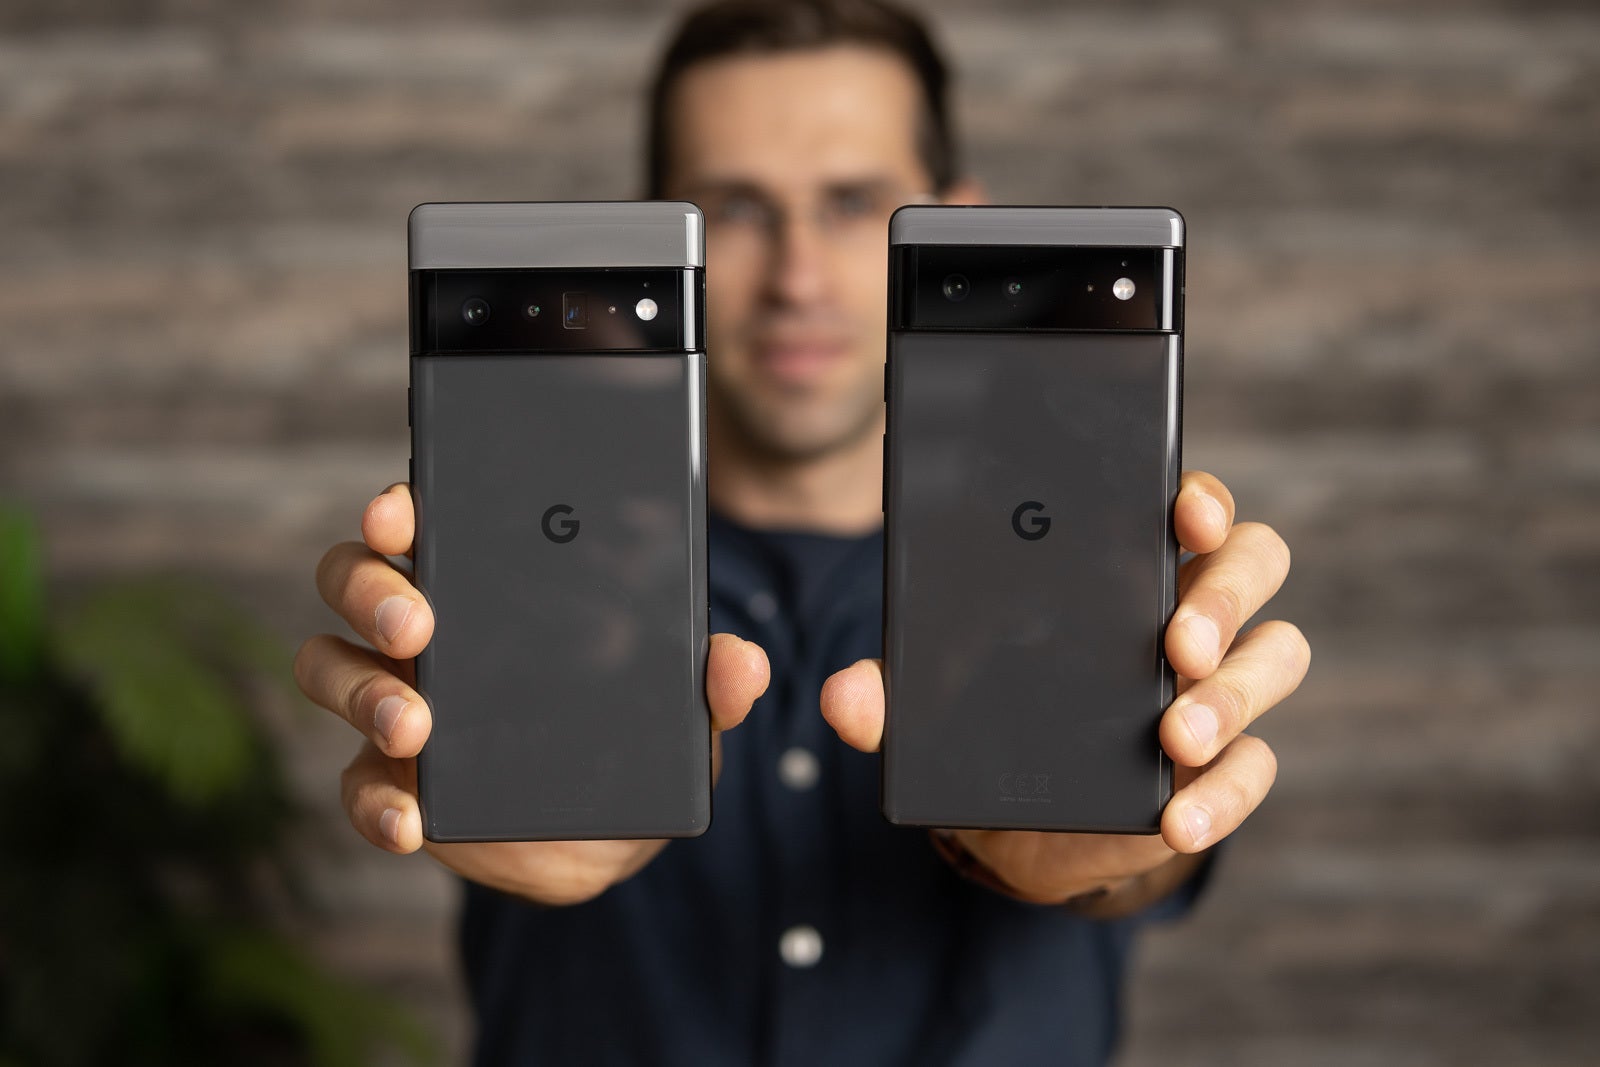 The camera modules of the Pixel 6 phones are interesting but not a new thing - iPhone 13, Galaxy S22 Ultra, and Pixel 6: new designs or blasts from the past?